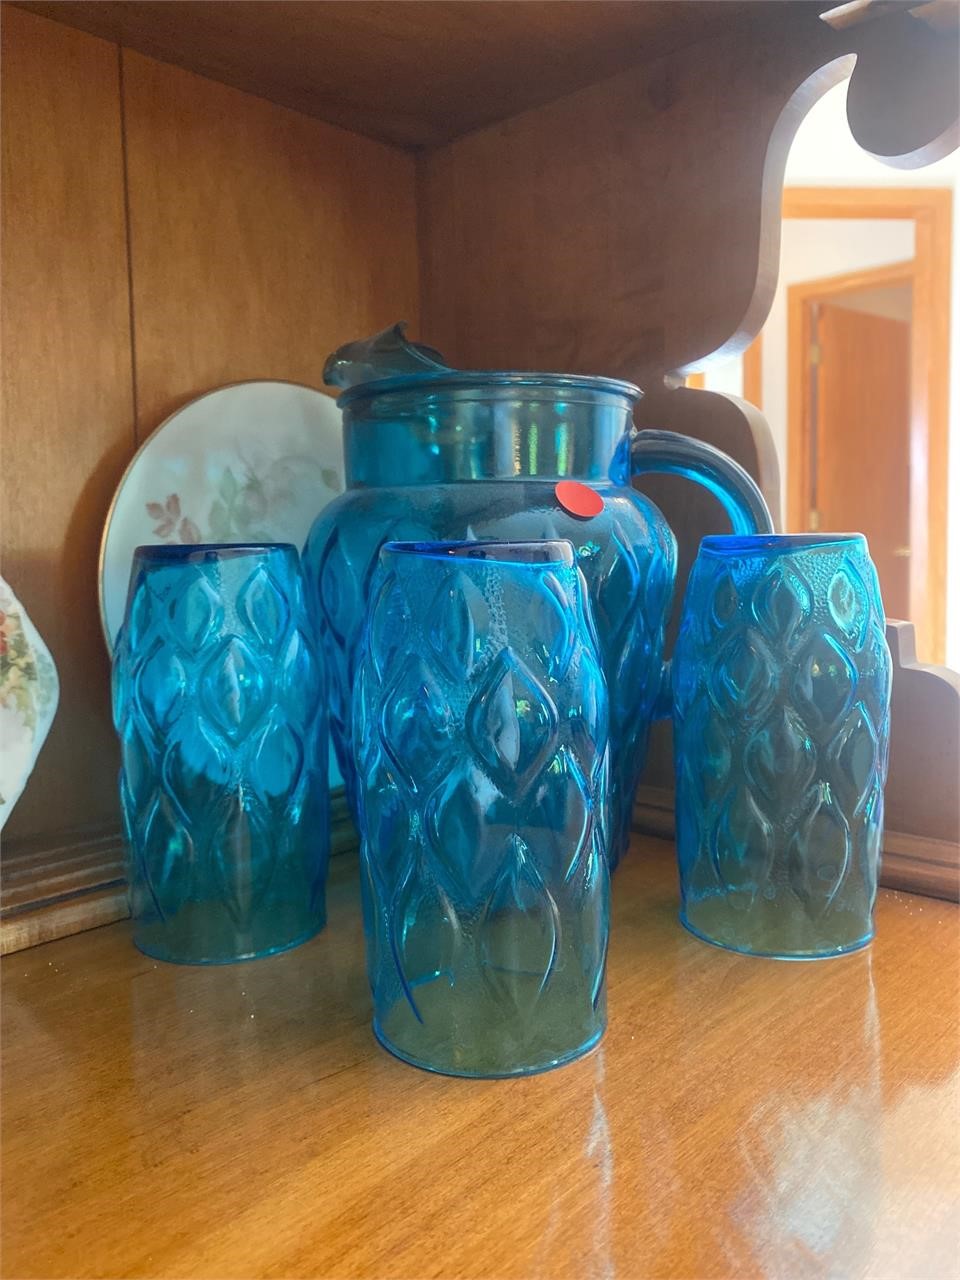 Pitcher and glasses set